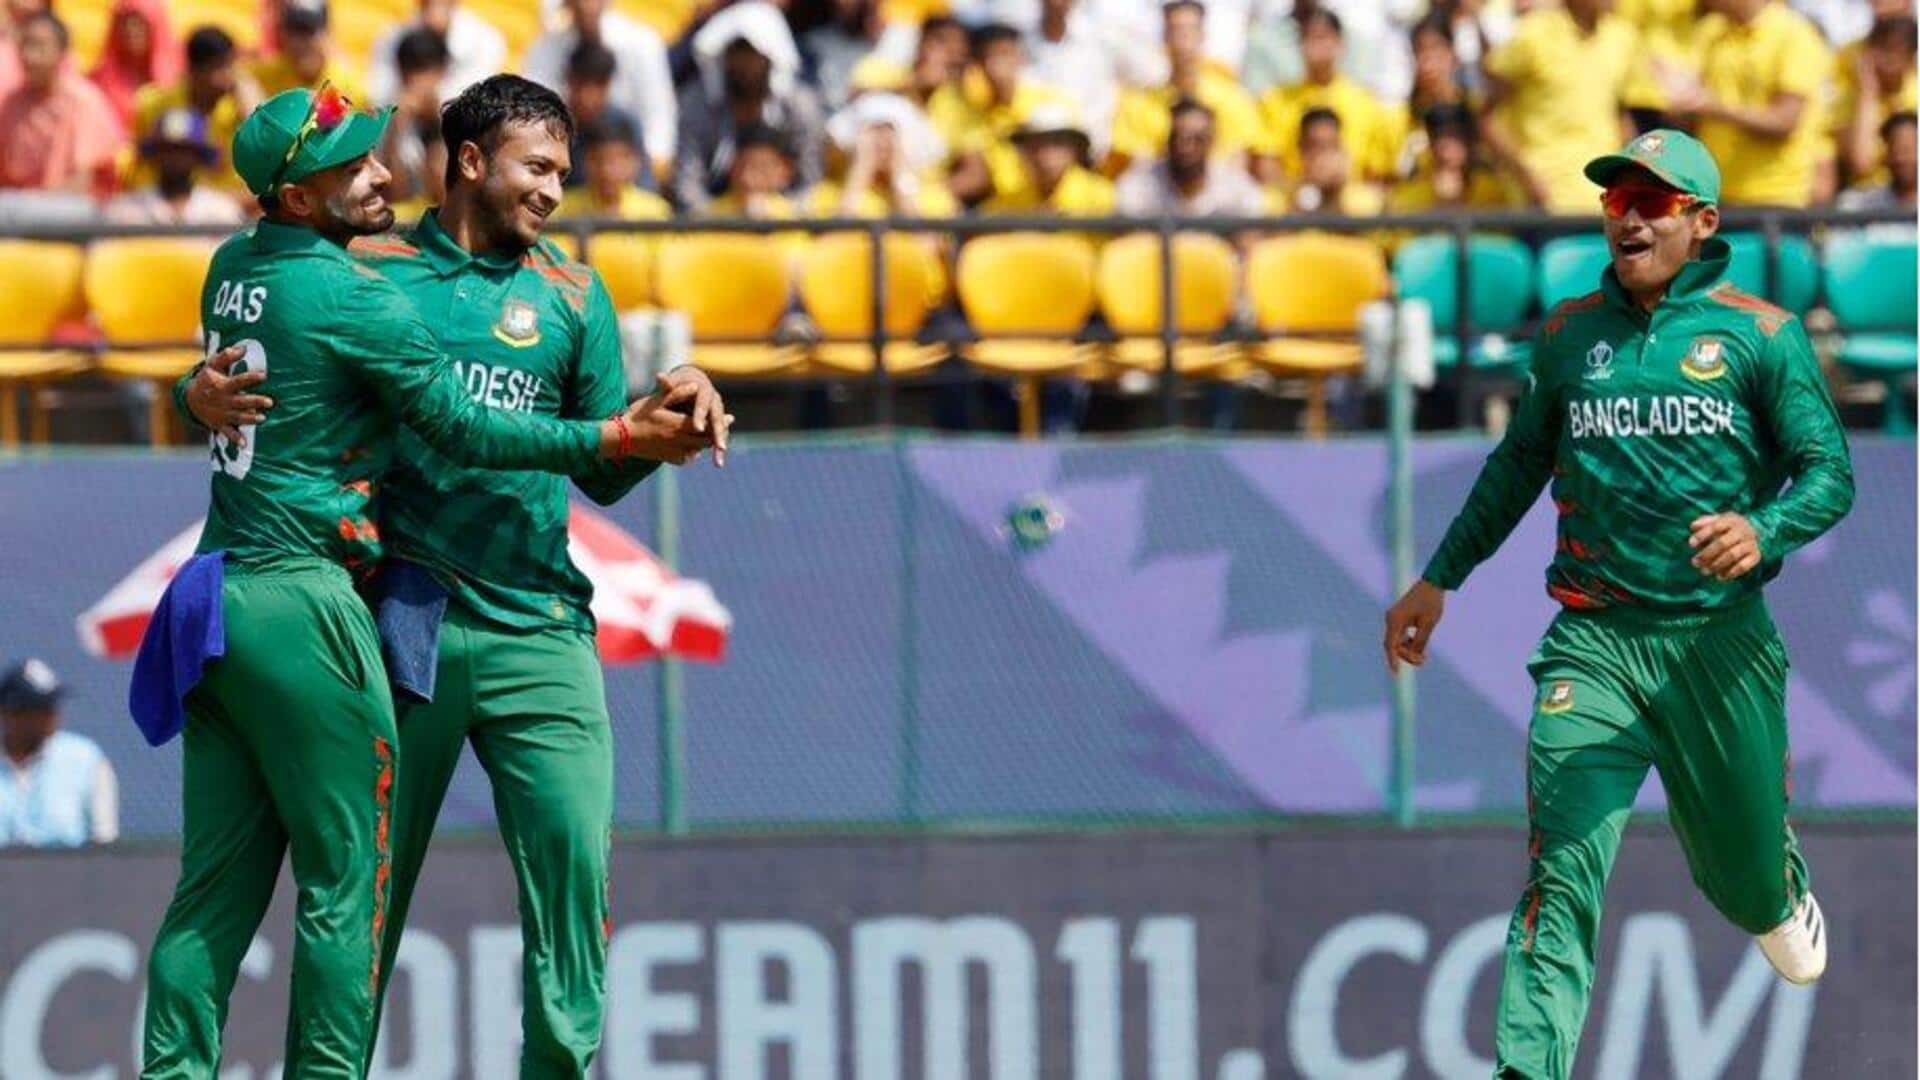 Shakib Al Hasan completes 50 wickets in neutral ODIs: Stats